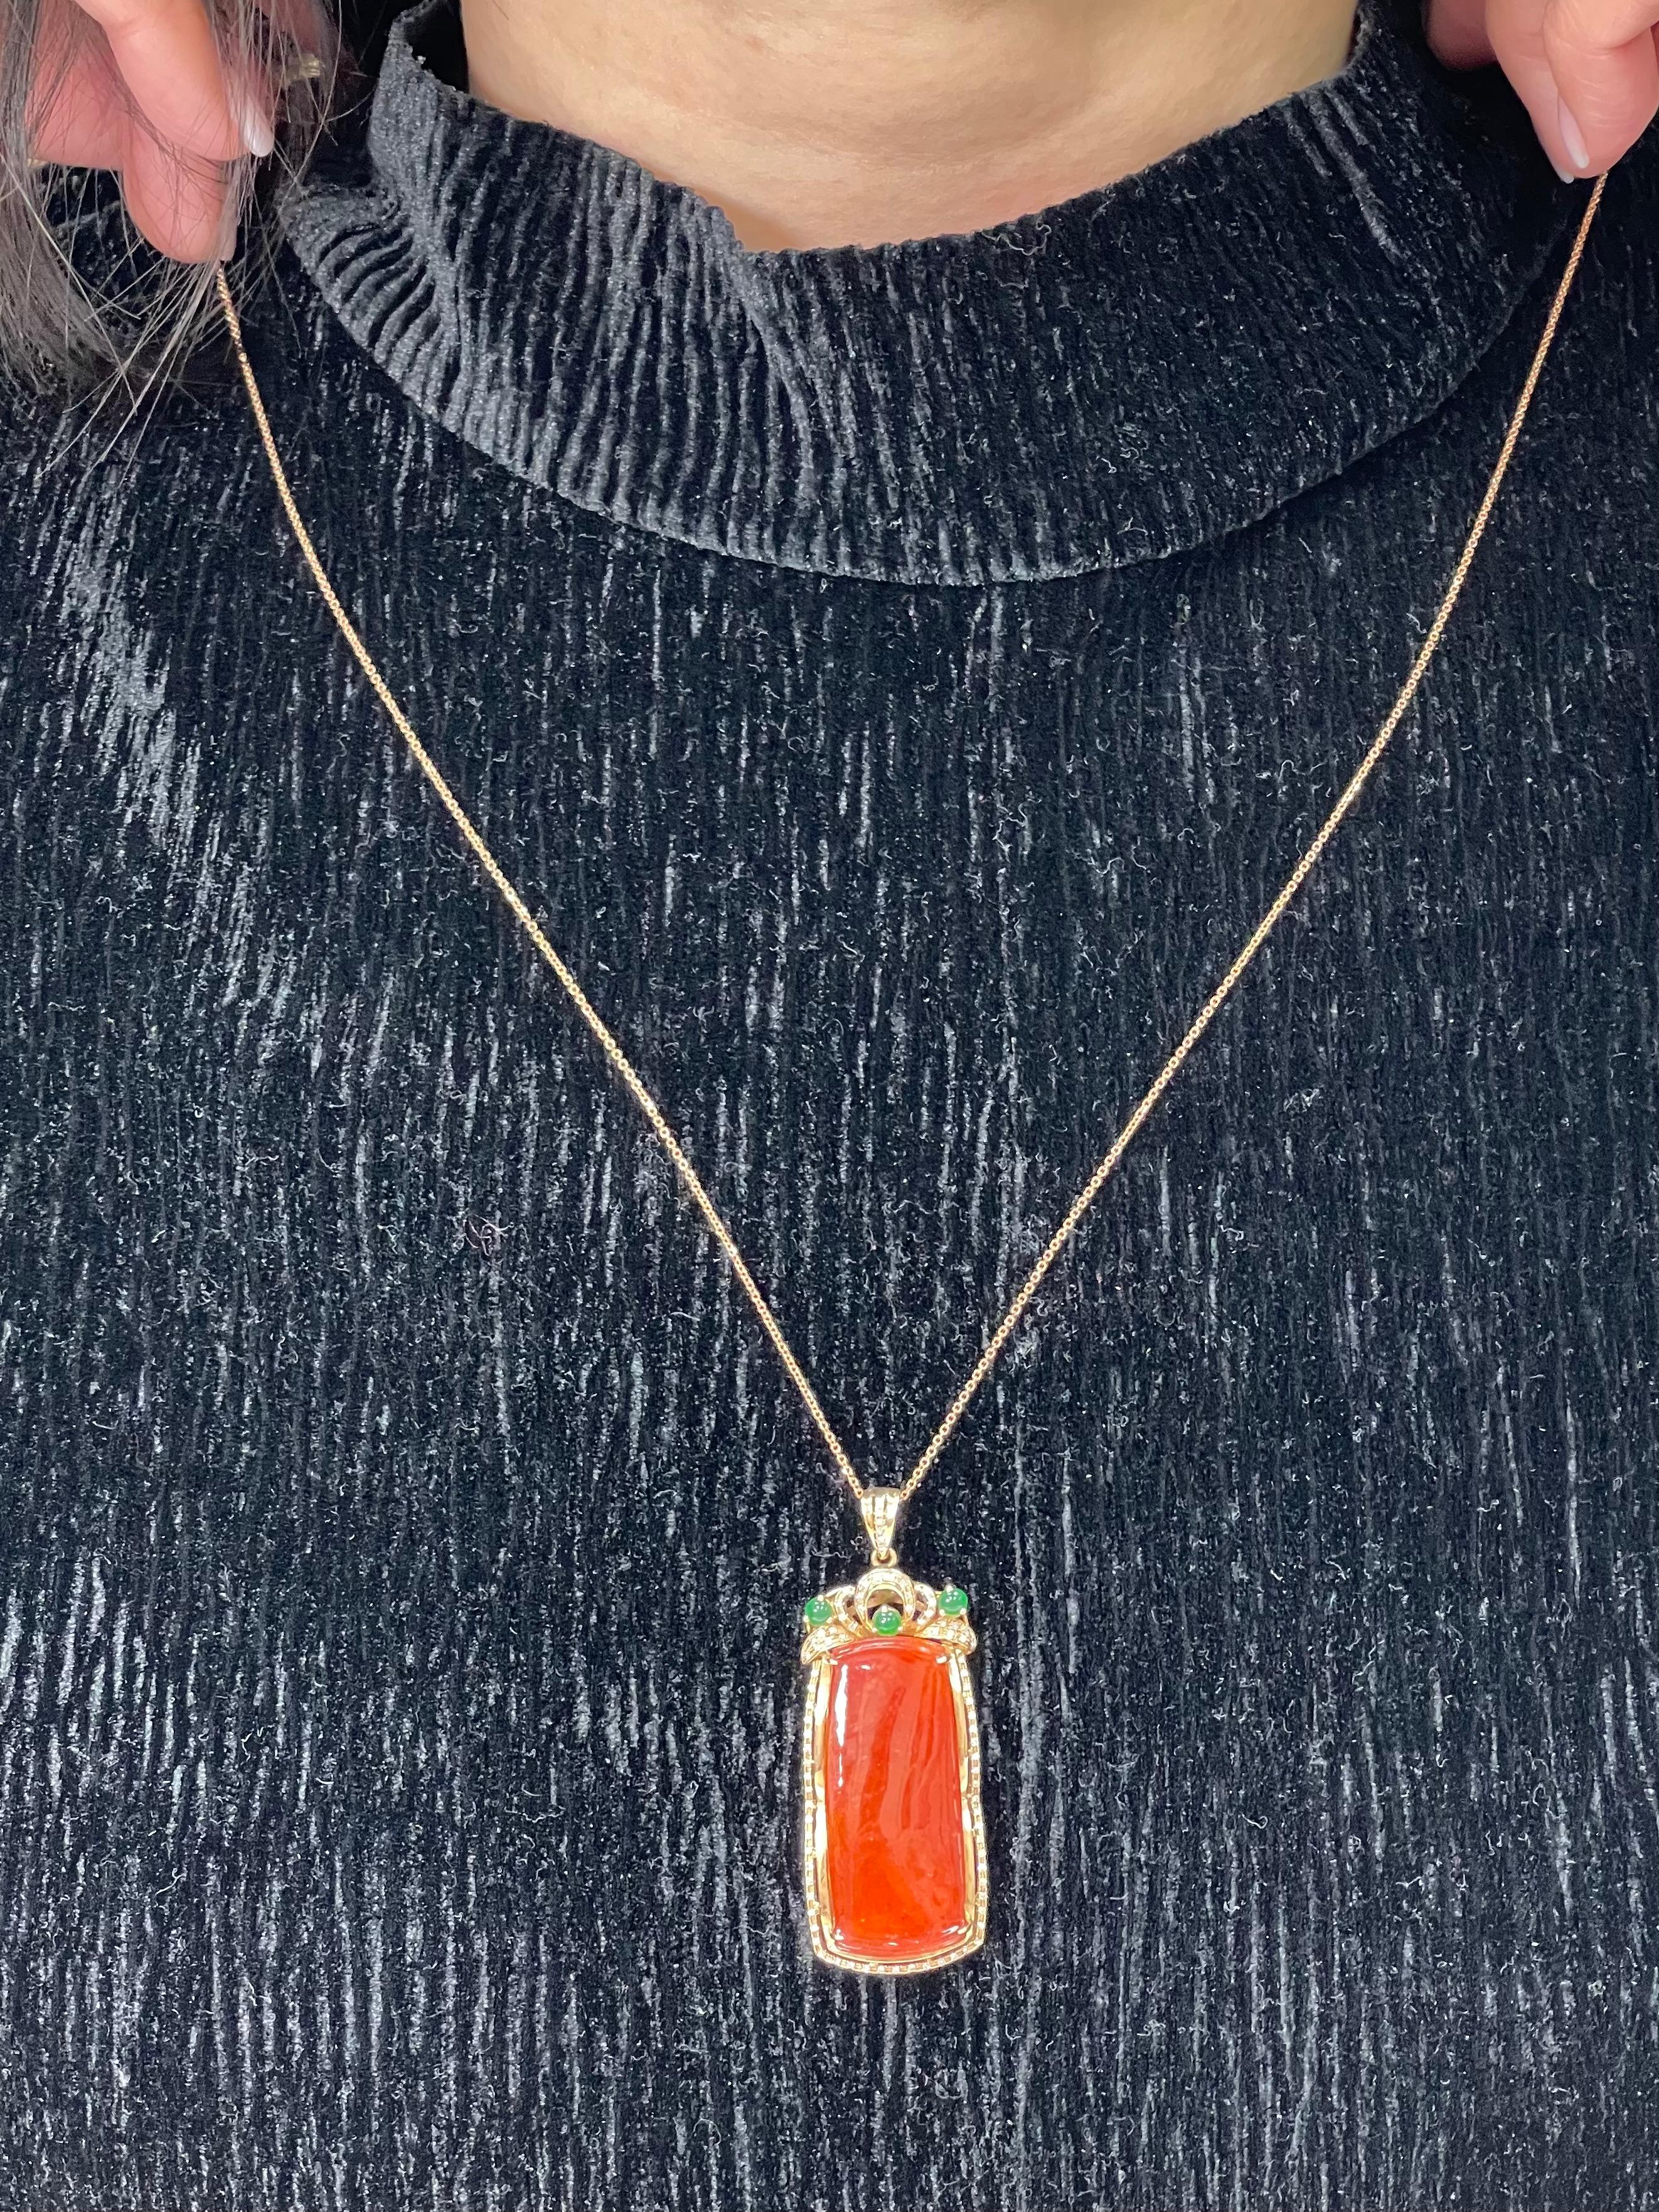 This certified natural red jadeite is not common. It is as beautiful from the front as it is from the back. A very unique design with hand etched (engraved) flower motif on reverse side. Here is a nice Jade pendant made with an eye catching 